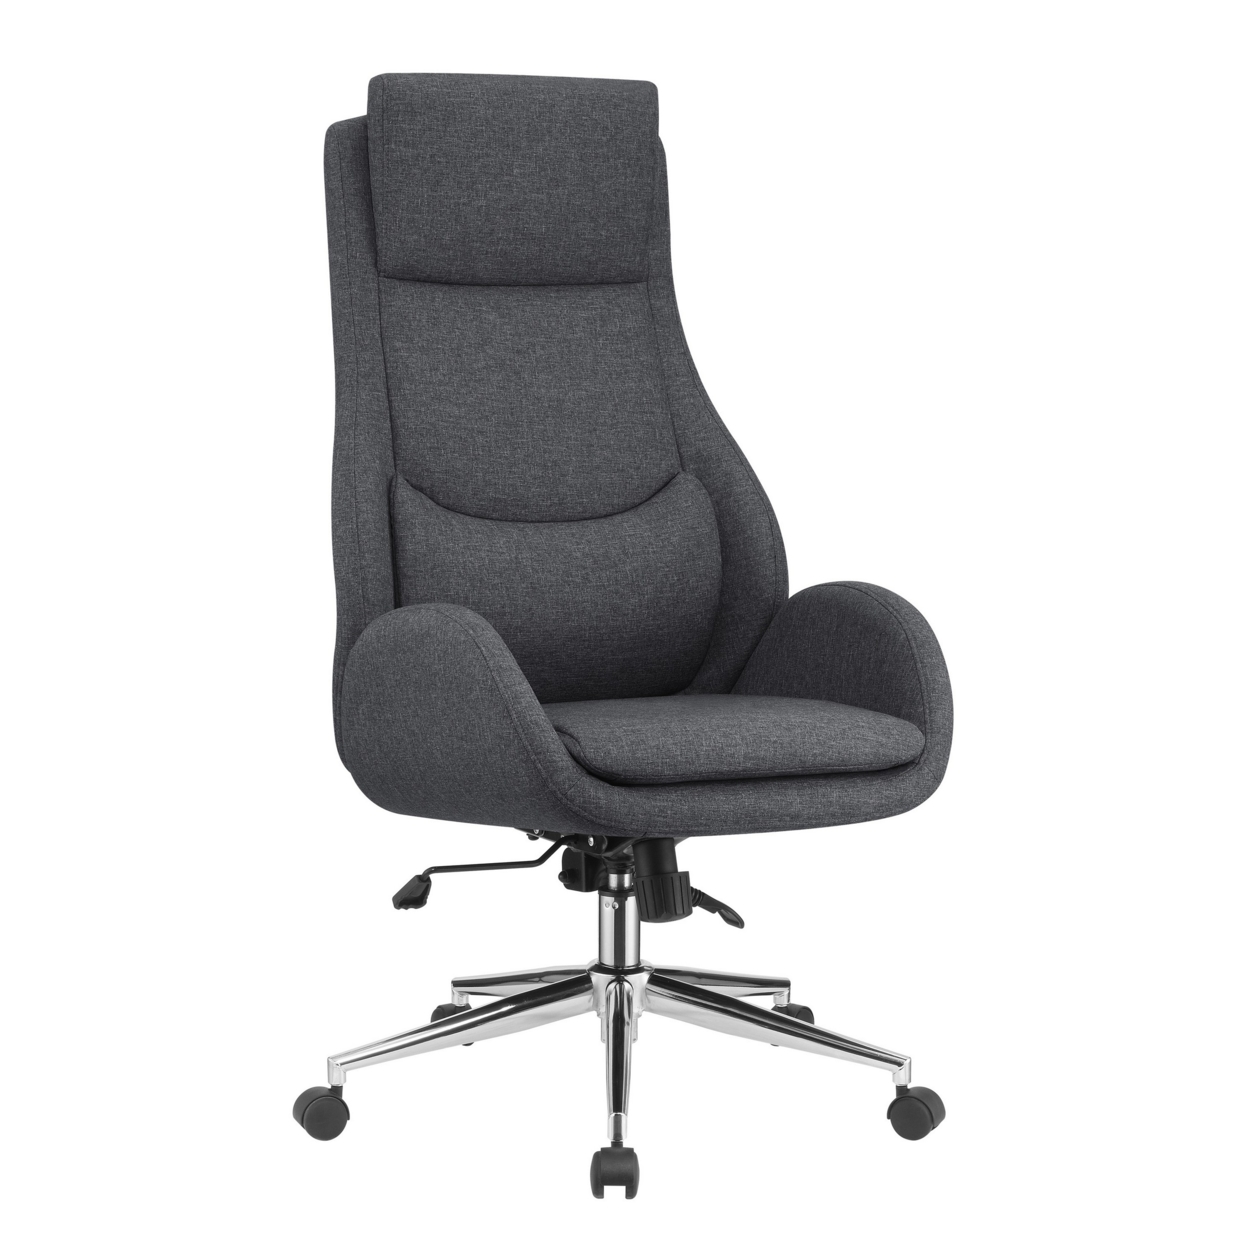 High Cushioned Tufted Back Fabric Office Chair With Star Base, Gray- Saltoro Sherpi